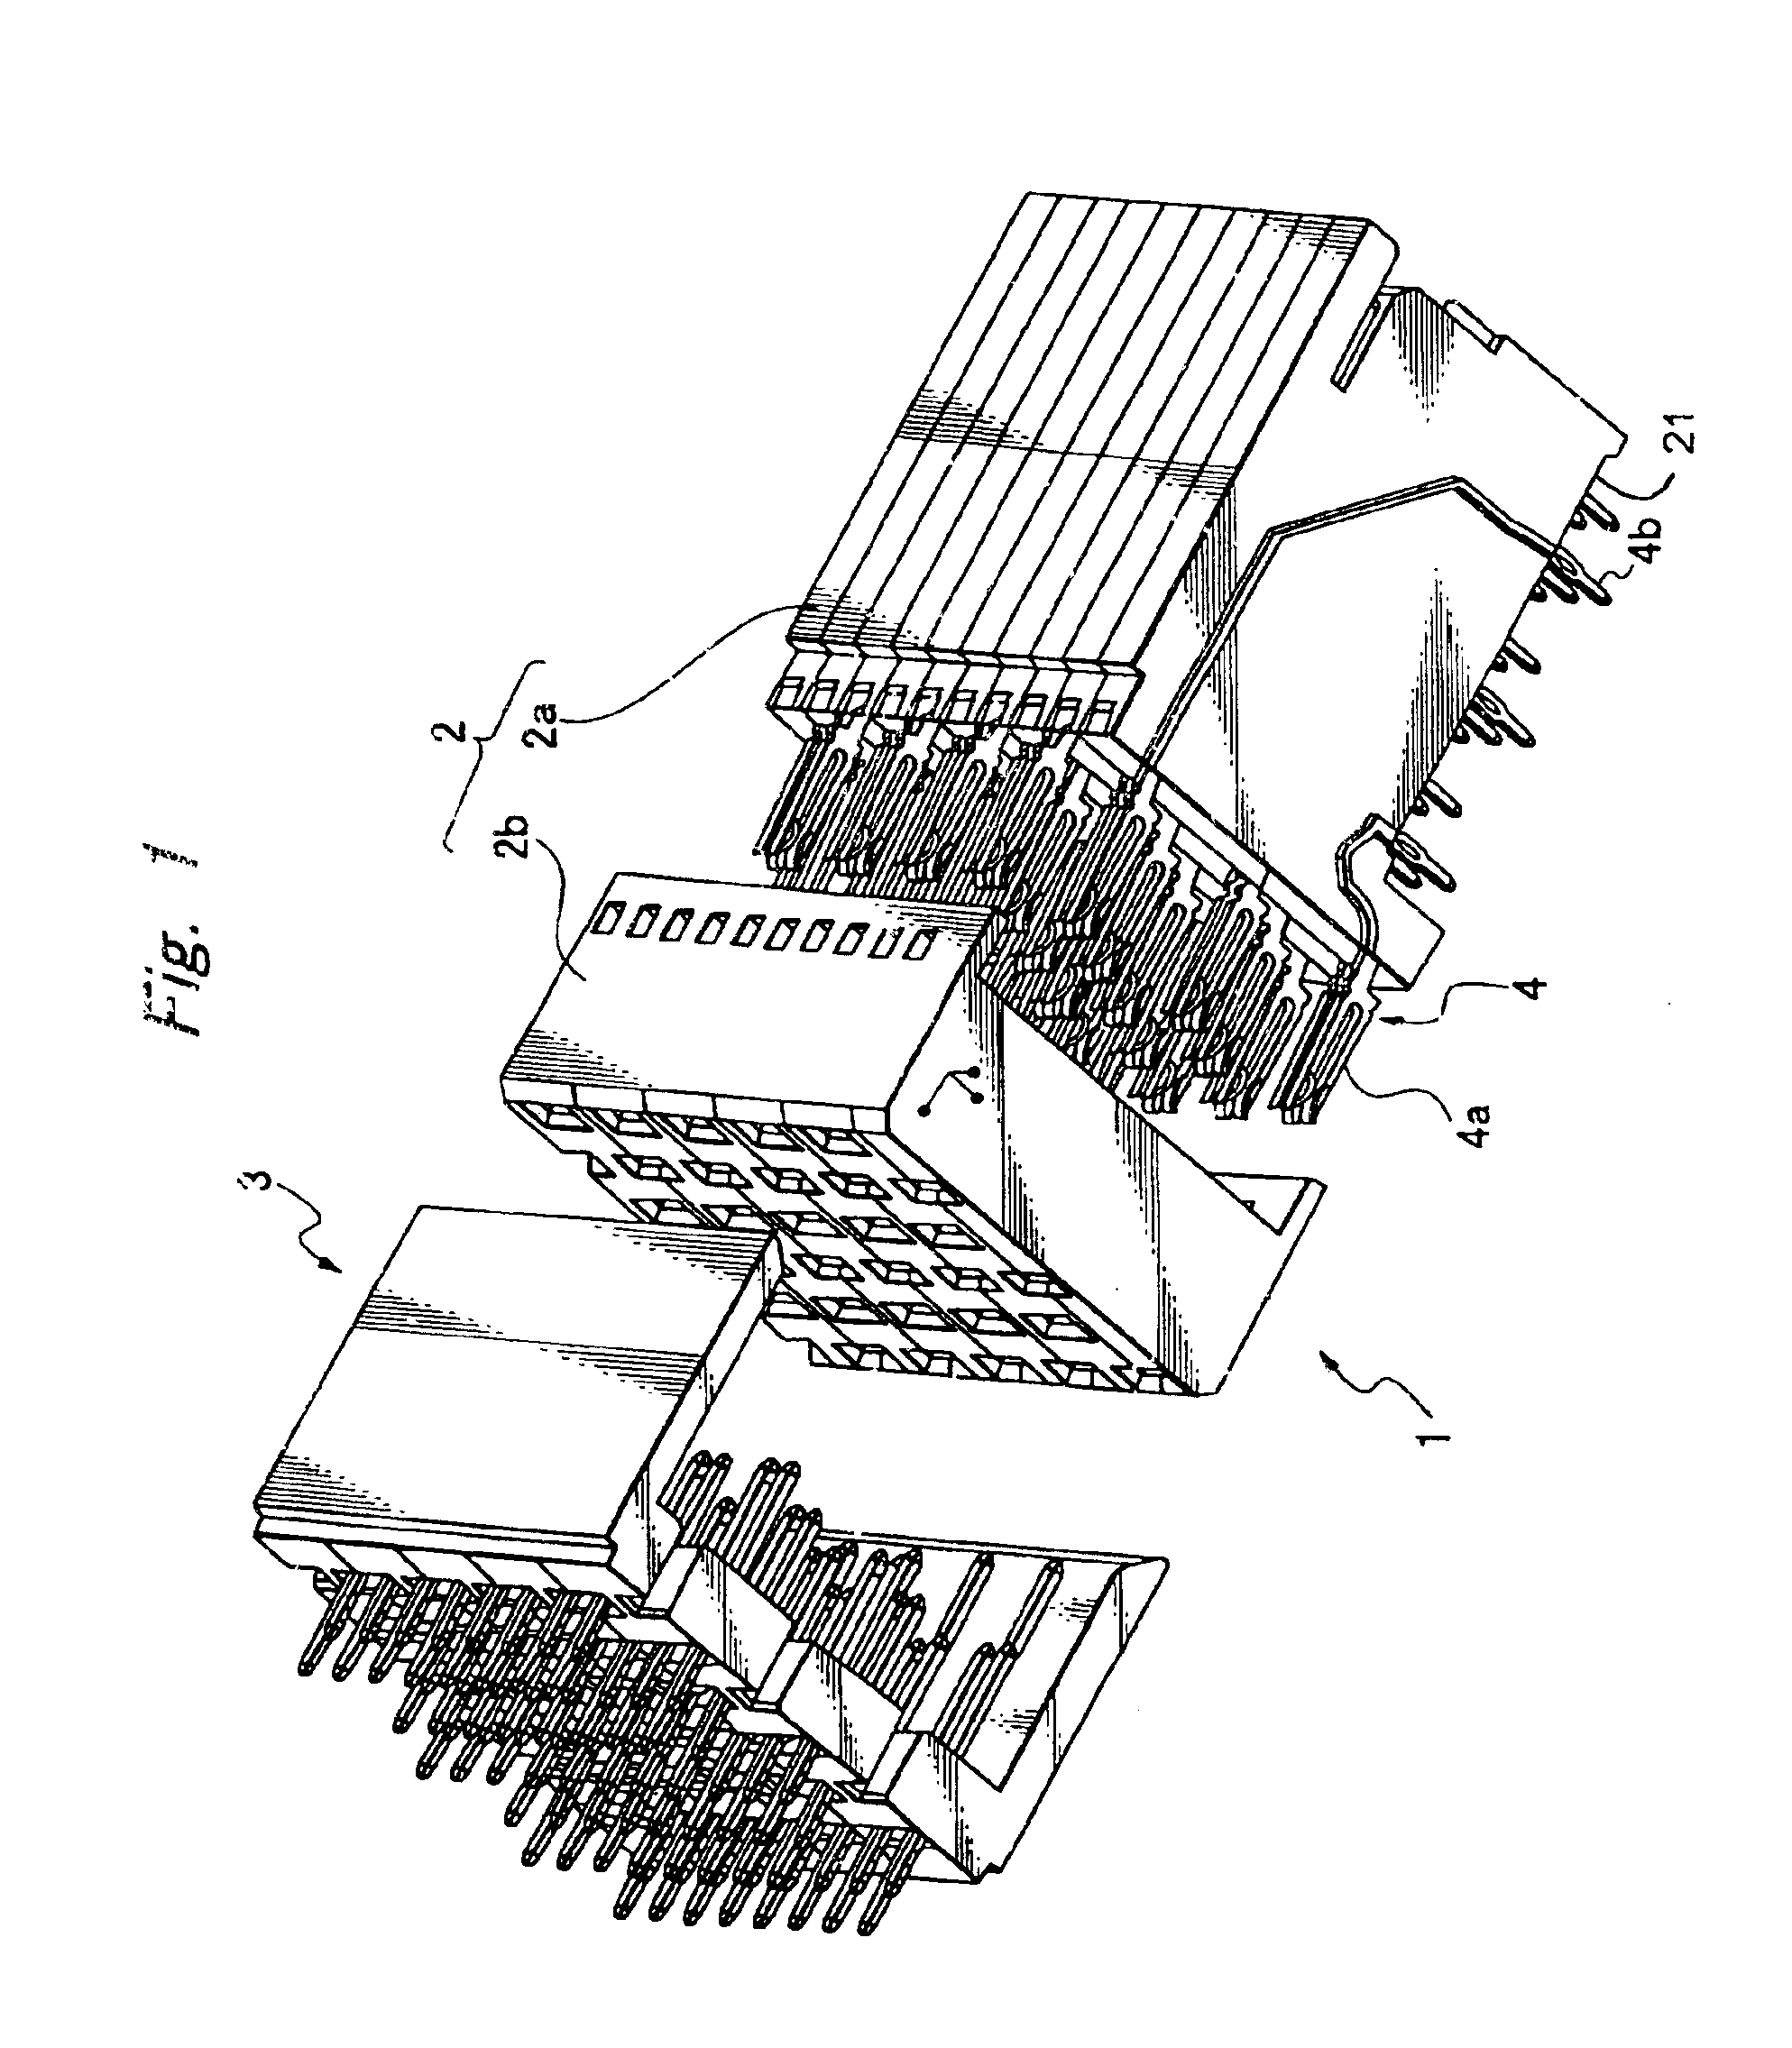 High-frequency electric connector having no ground terminals